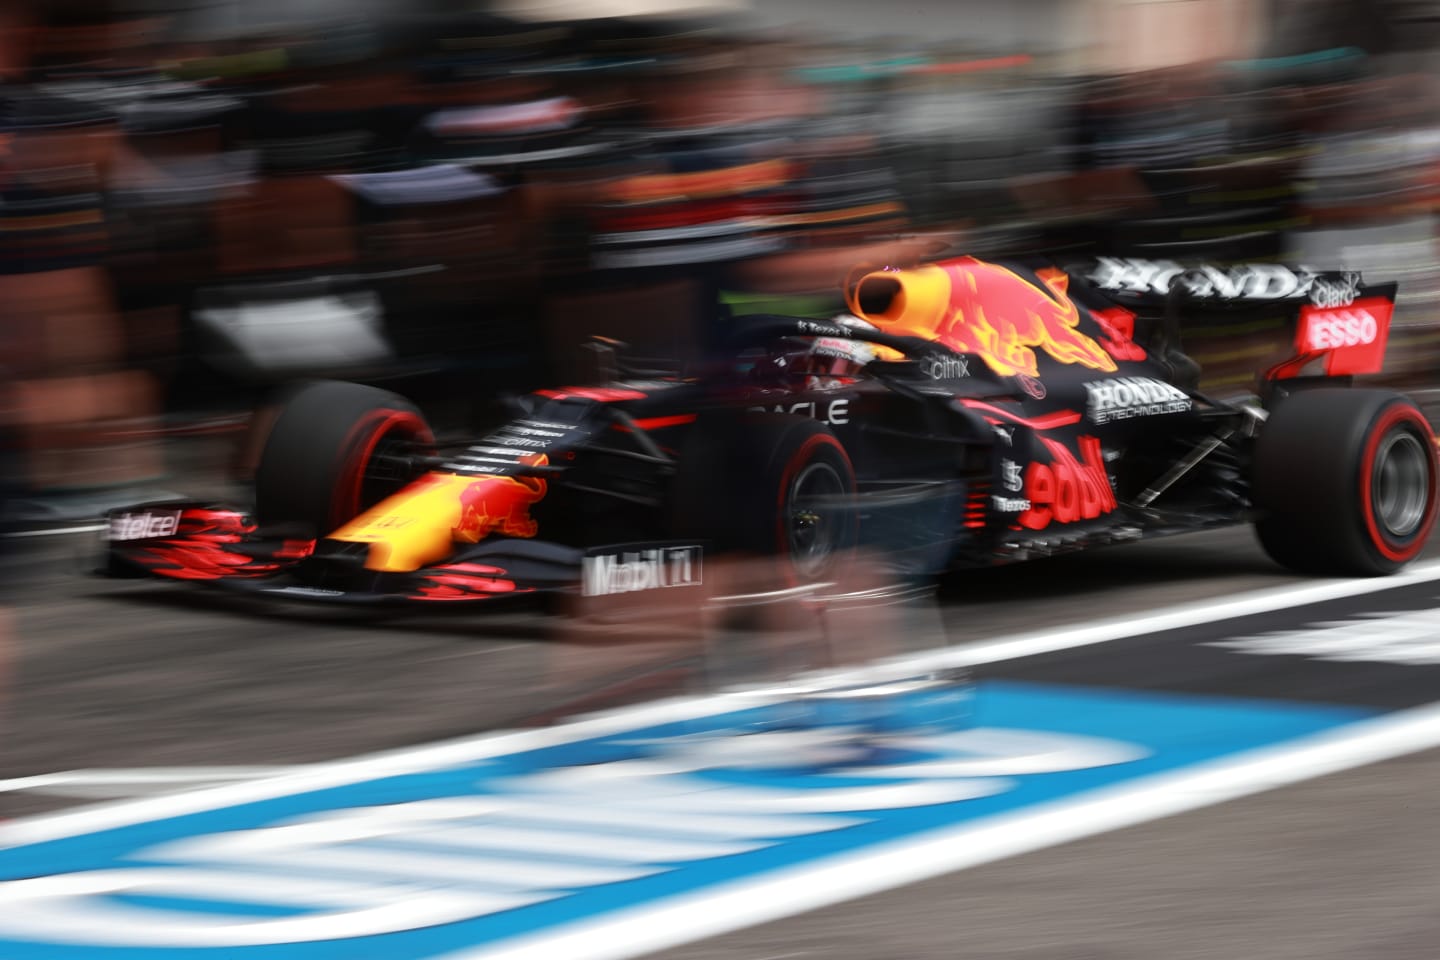 LE CASTELLET, FRANCE - JUNE 19: Max Verstappen of the Netherlands driving the (33) Red Bull Racing RB16B Honda in the Pitlane during qualifying ahead of the F1 Grand Prix of France at Circuit Paul Ricard on June 19, 2021 in Le Castellet, France. (Photo by Mark Thompson/Getty Images)